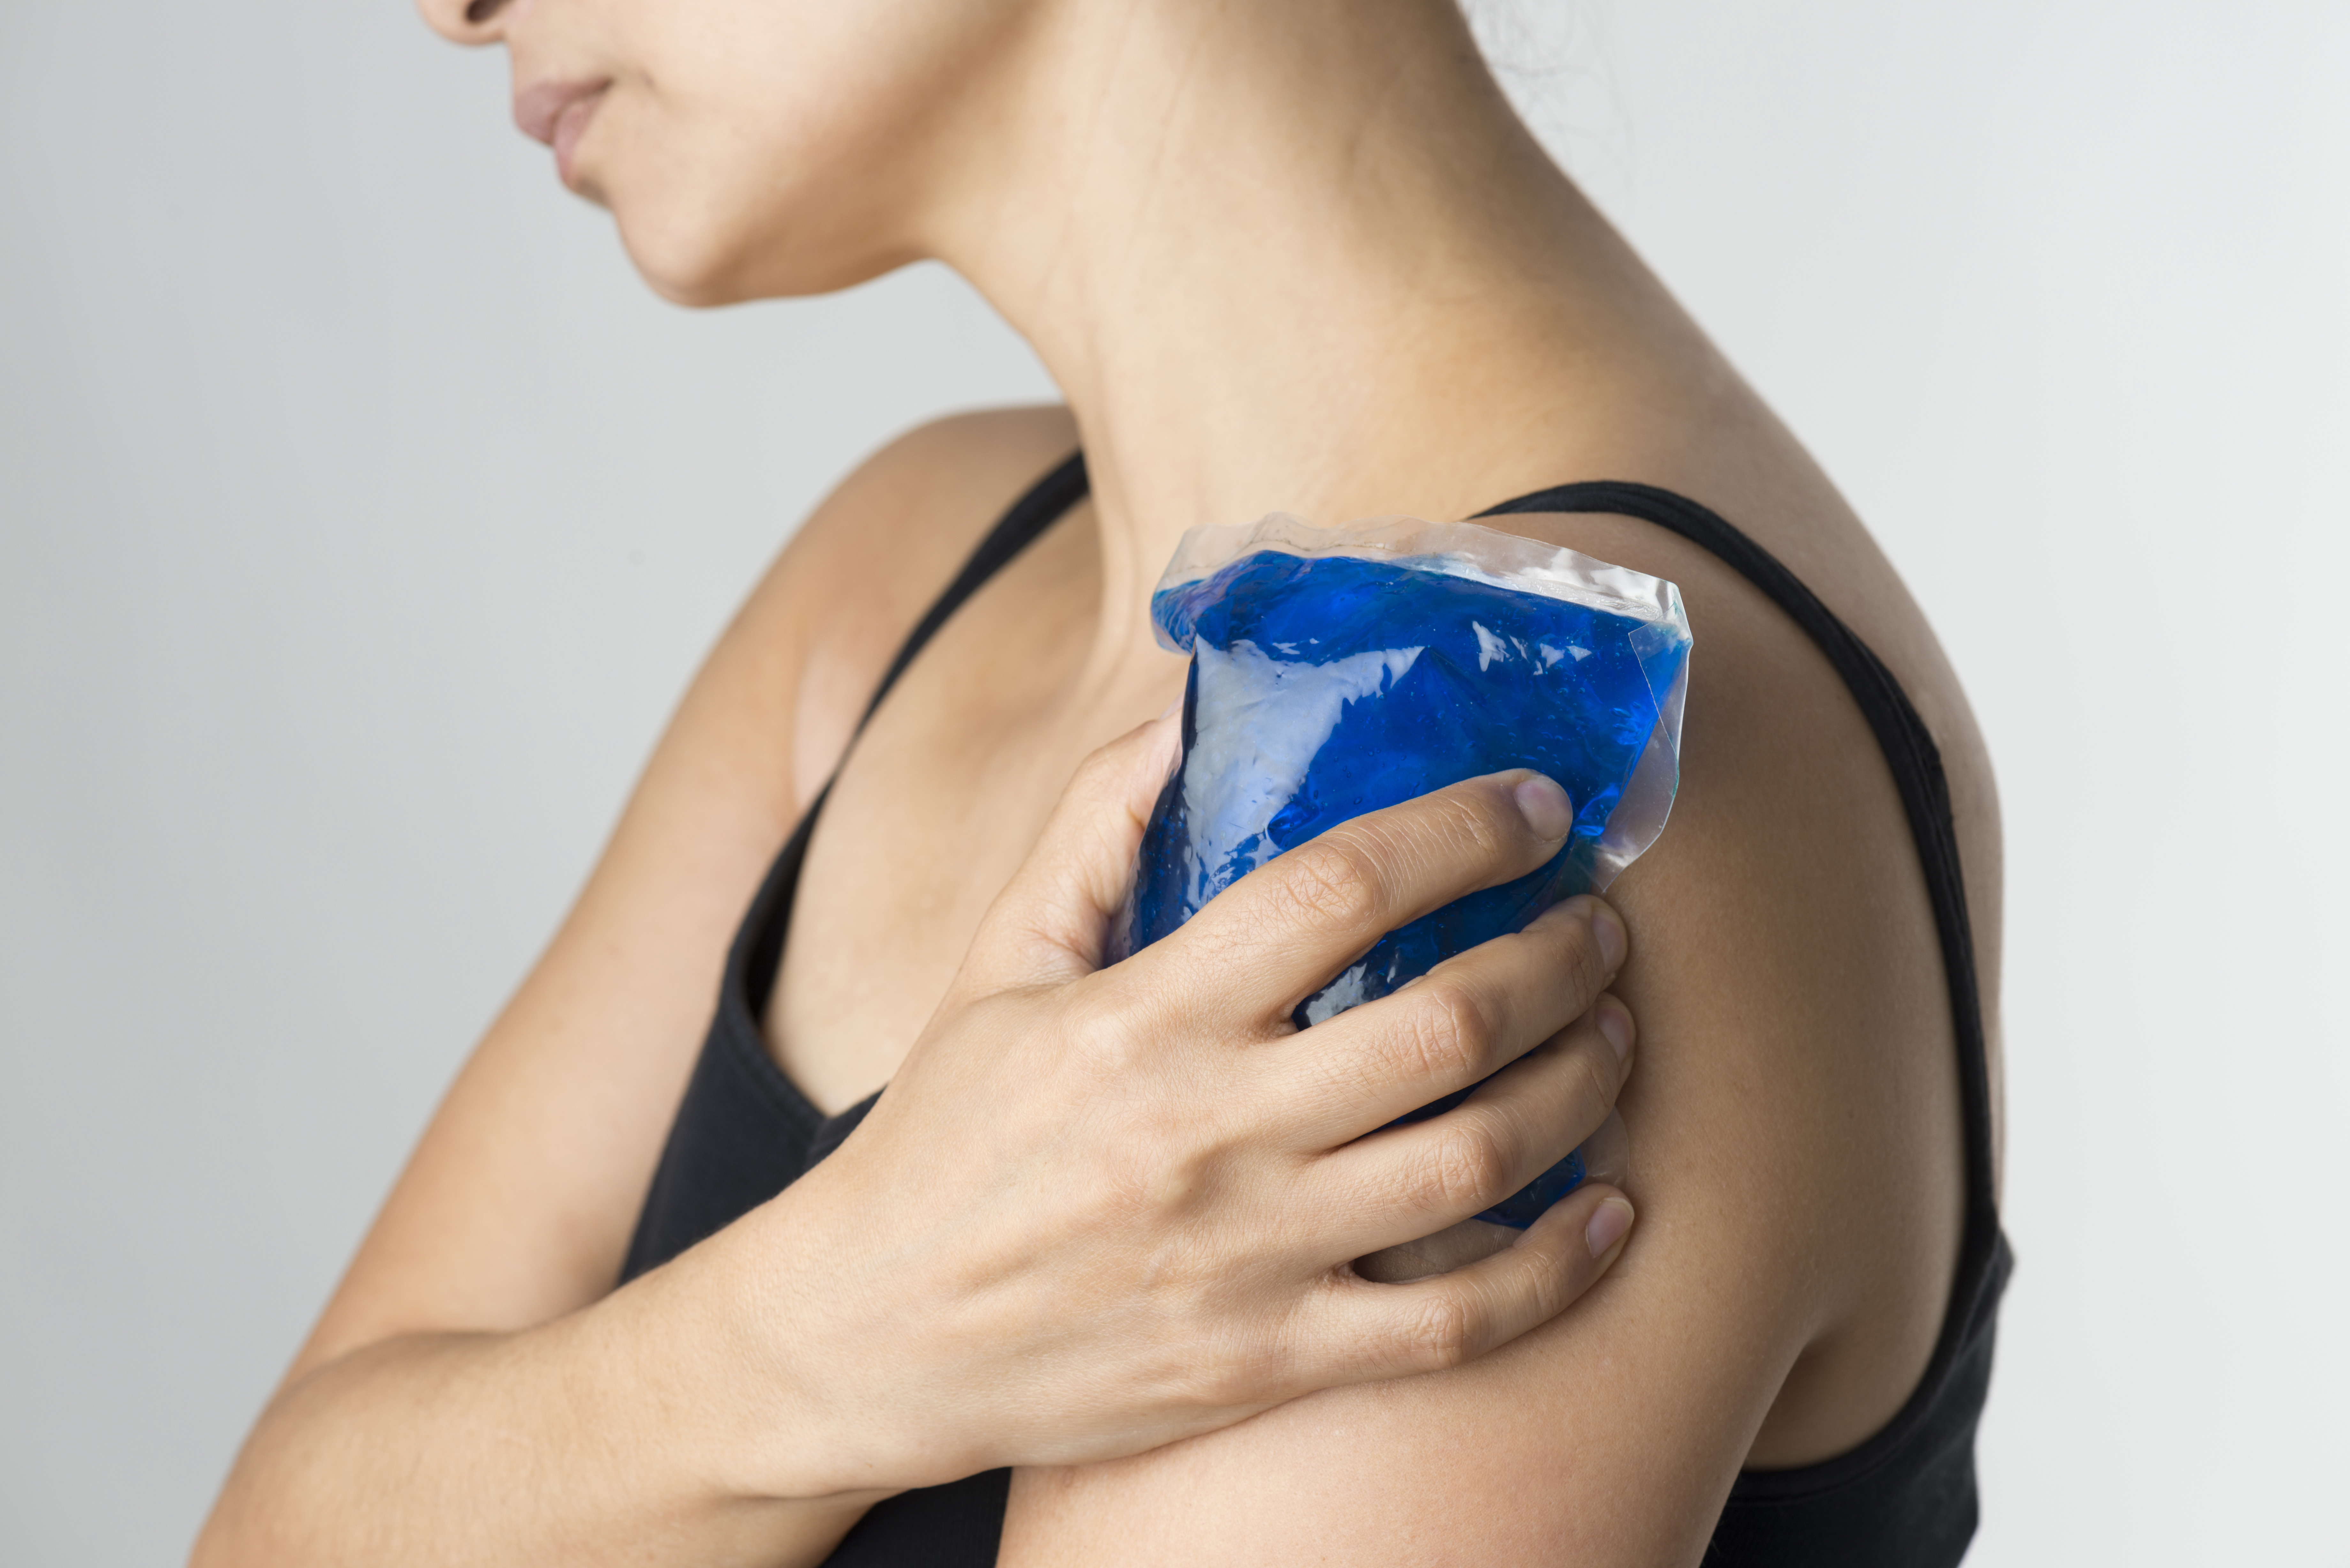 Woman cooling her shoulder/upper arm with a cold compress